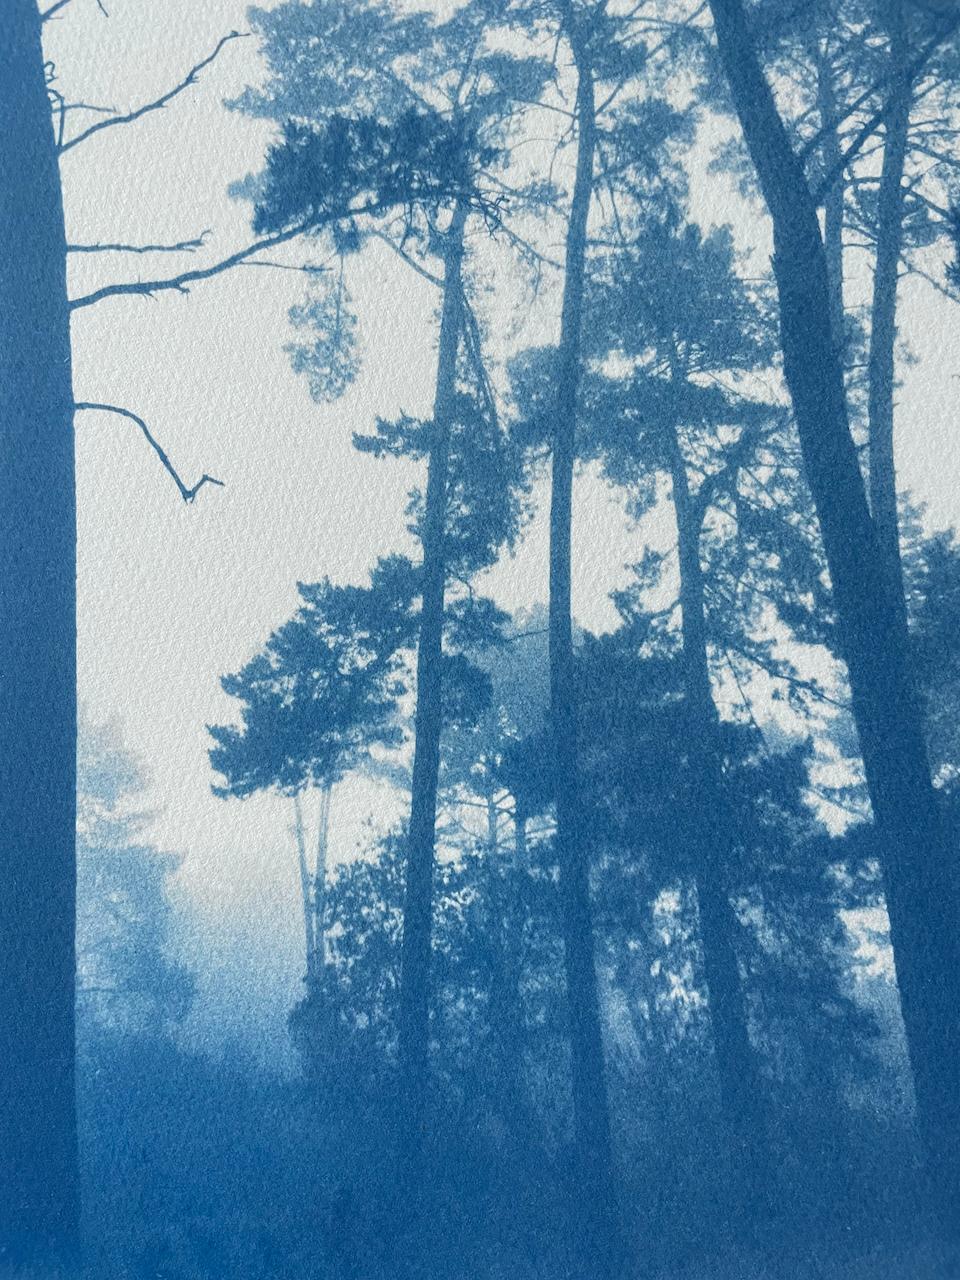 Slender Pines (Hand-printed cyanotype,  18 x 12 inches) - Photograph by Christine So